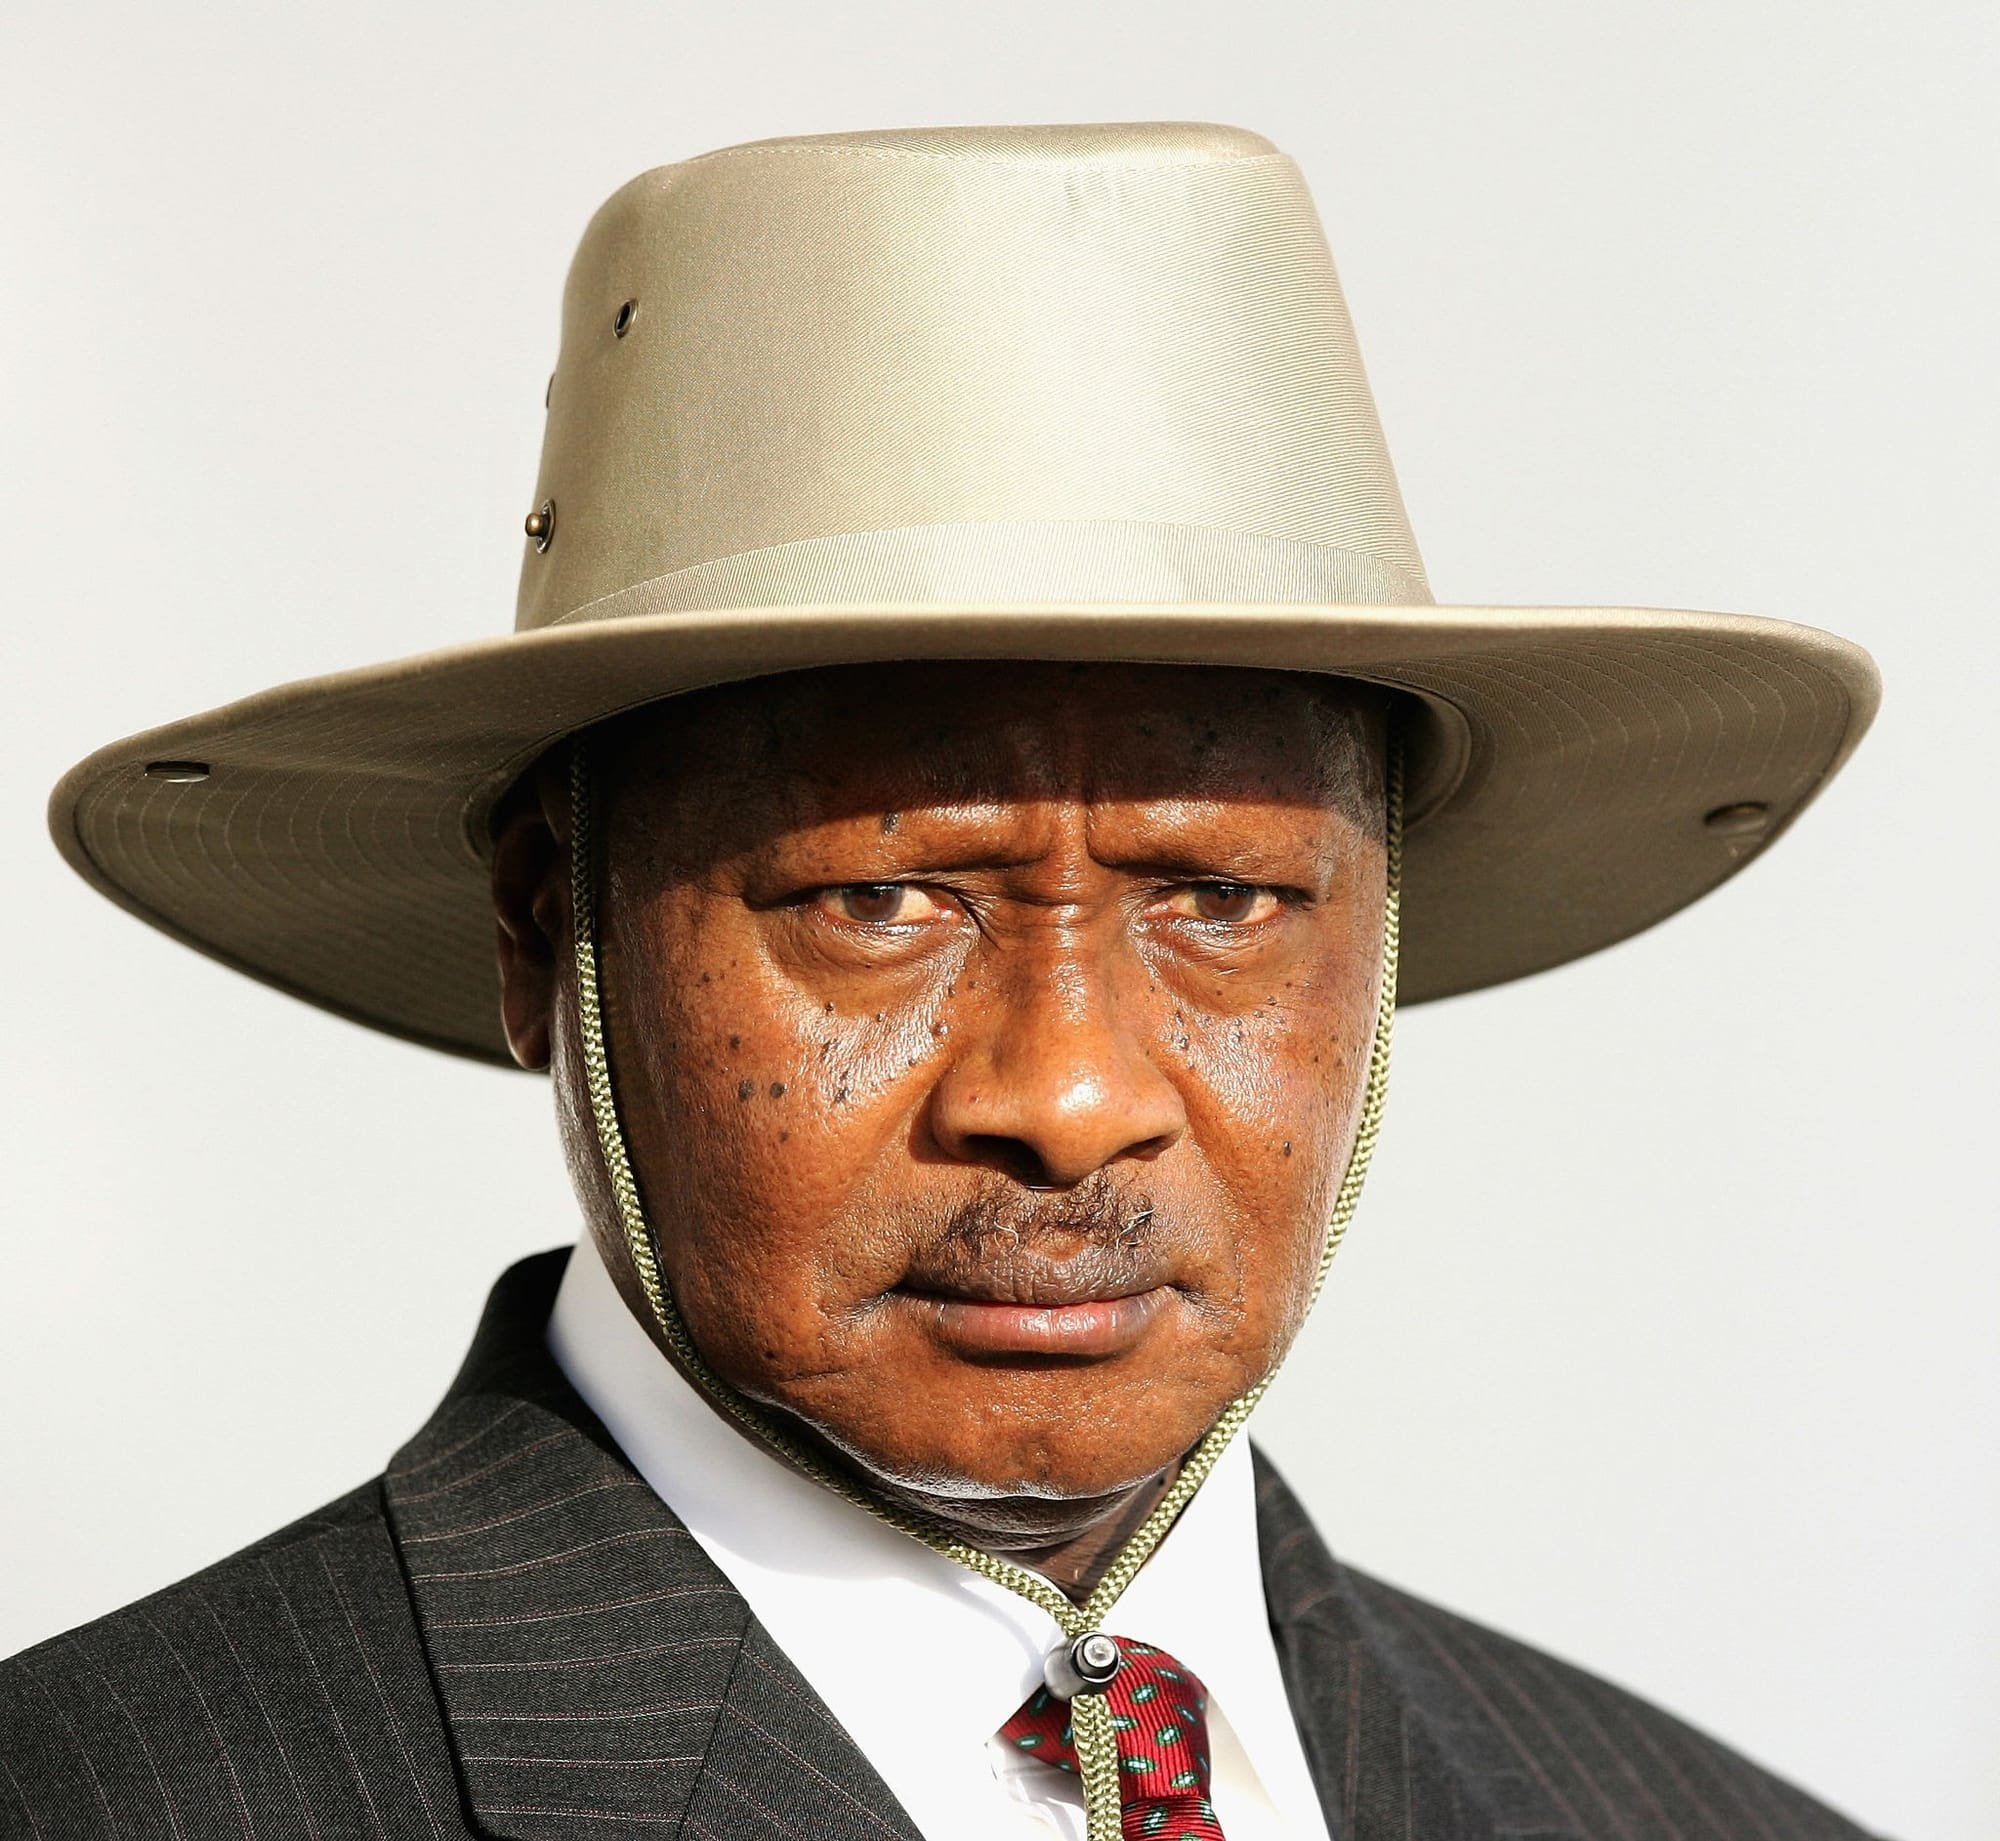 MUSEVENI REFUSED TO ATTEND THE AFRICAN CIMATE SUMMIT.